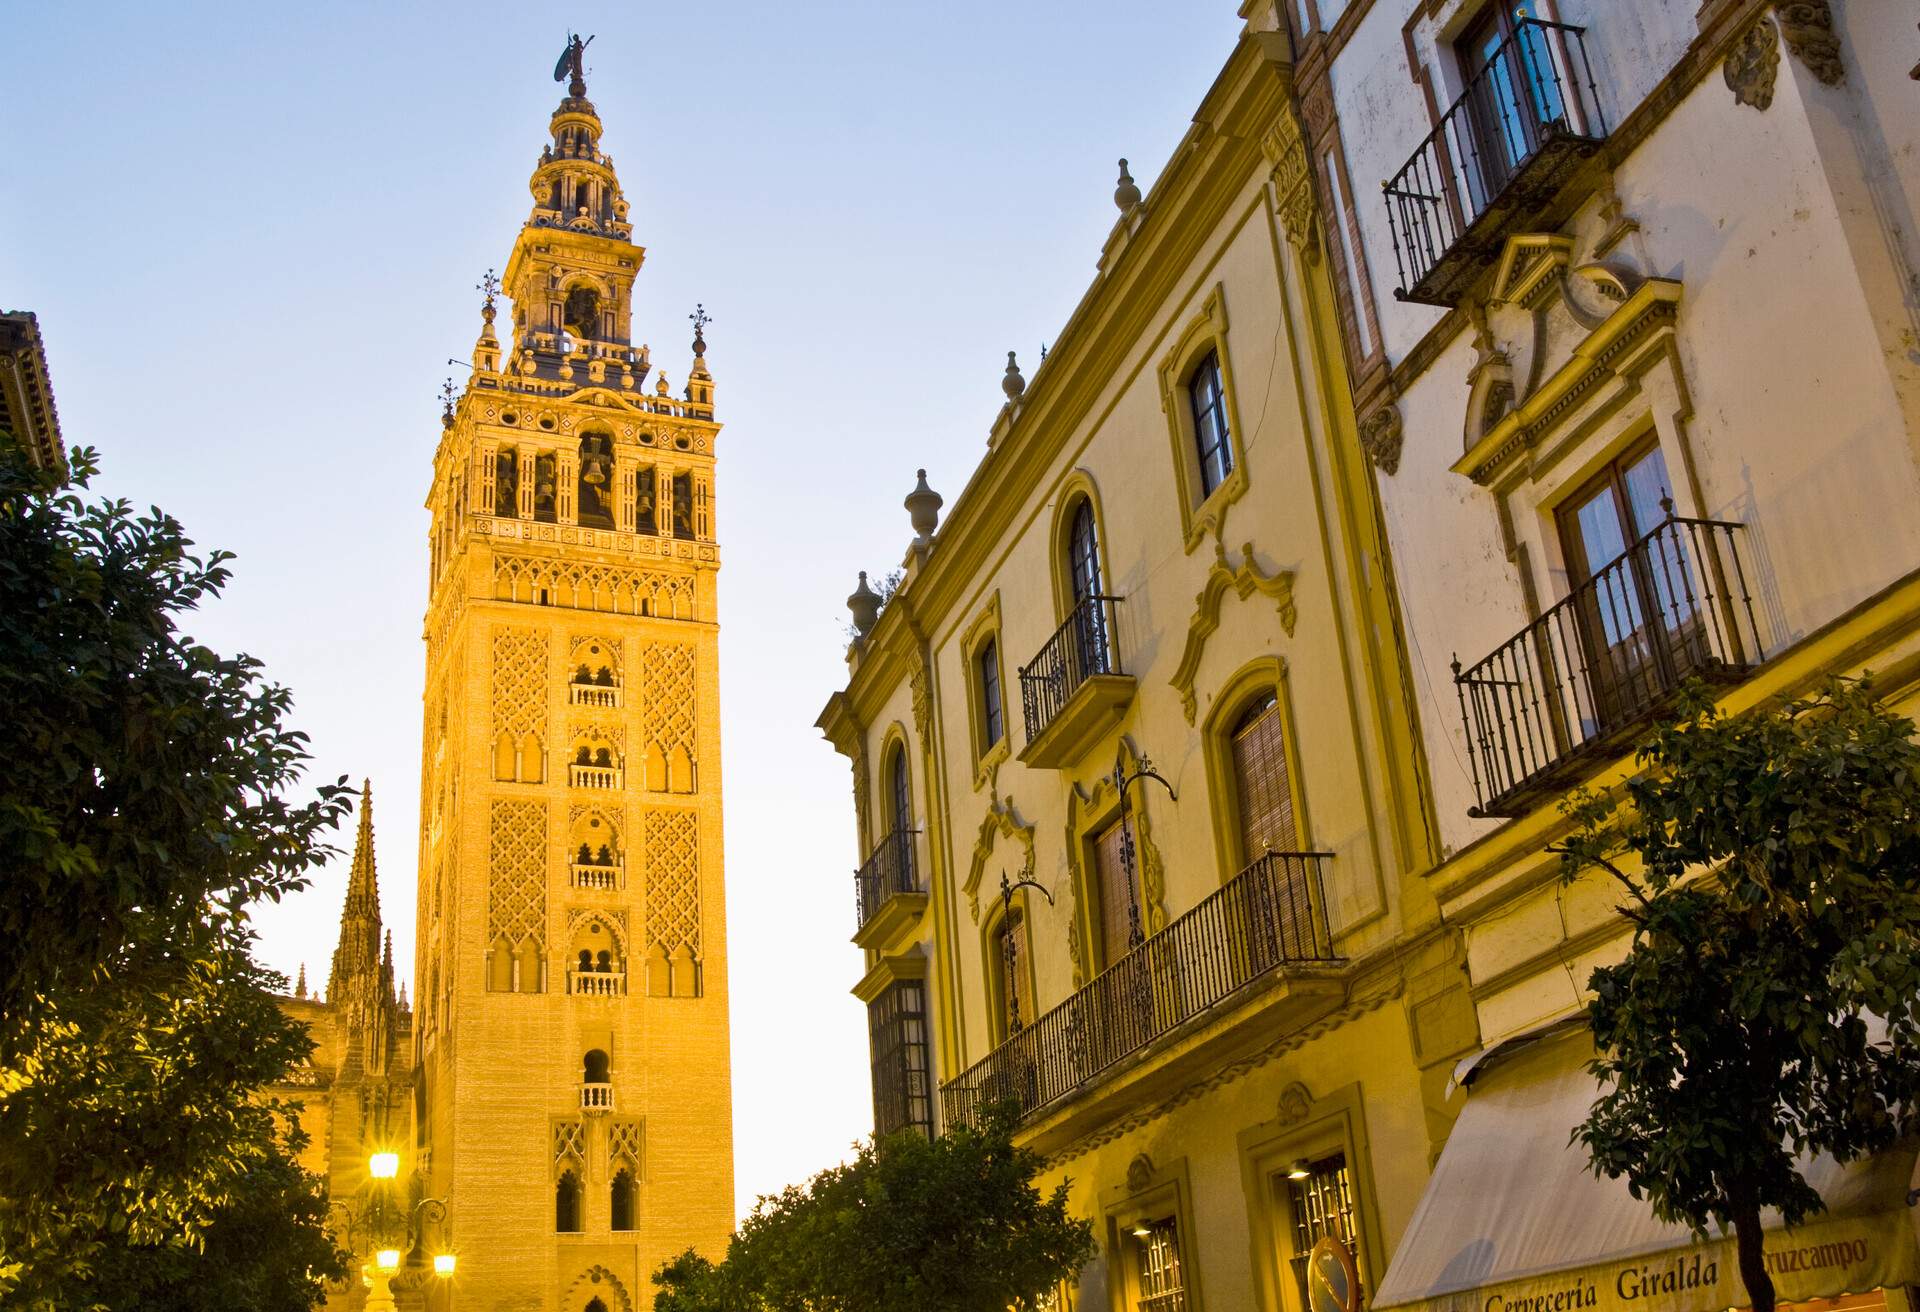 The Giralda is a former minaret that was converted to a bell tower for the Cathedral of Seville in Seville. The tower is 104.5 m (343 ft) in height and it was one of the most important symbols in the medieval city.